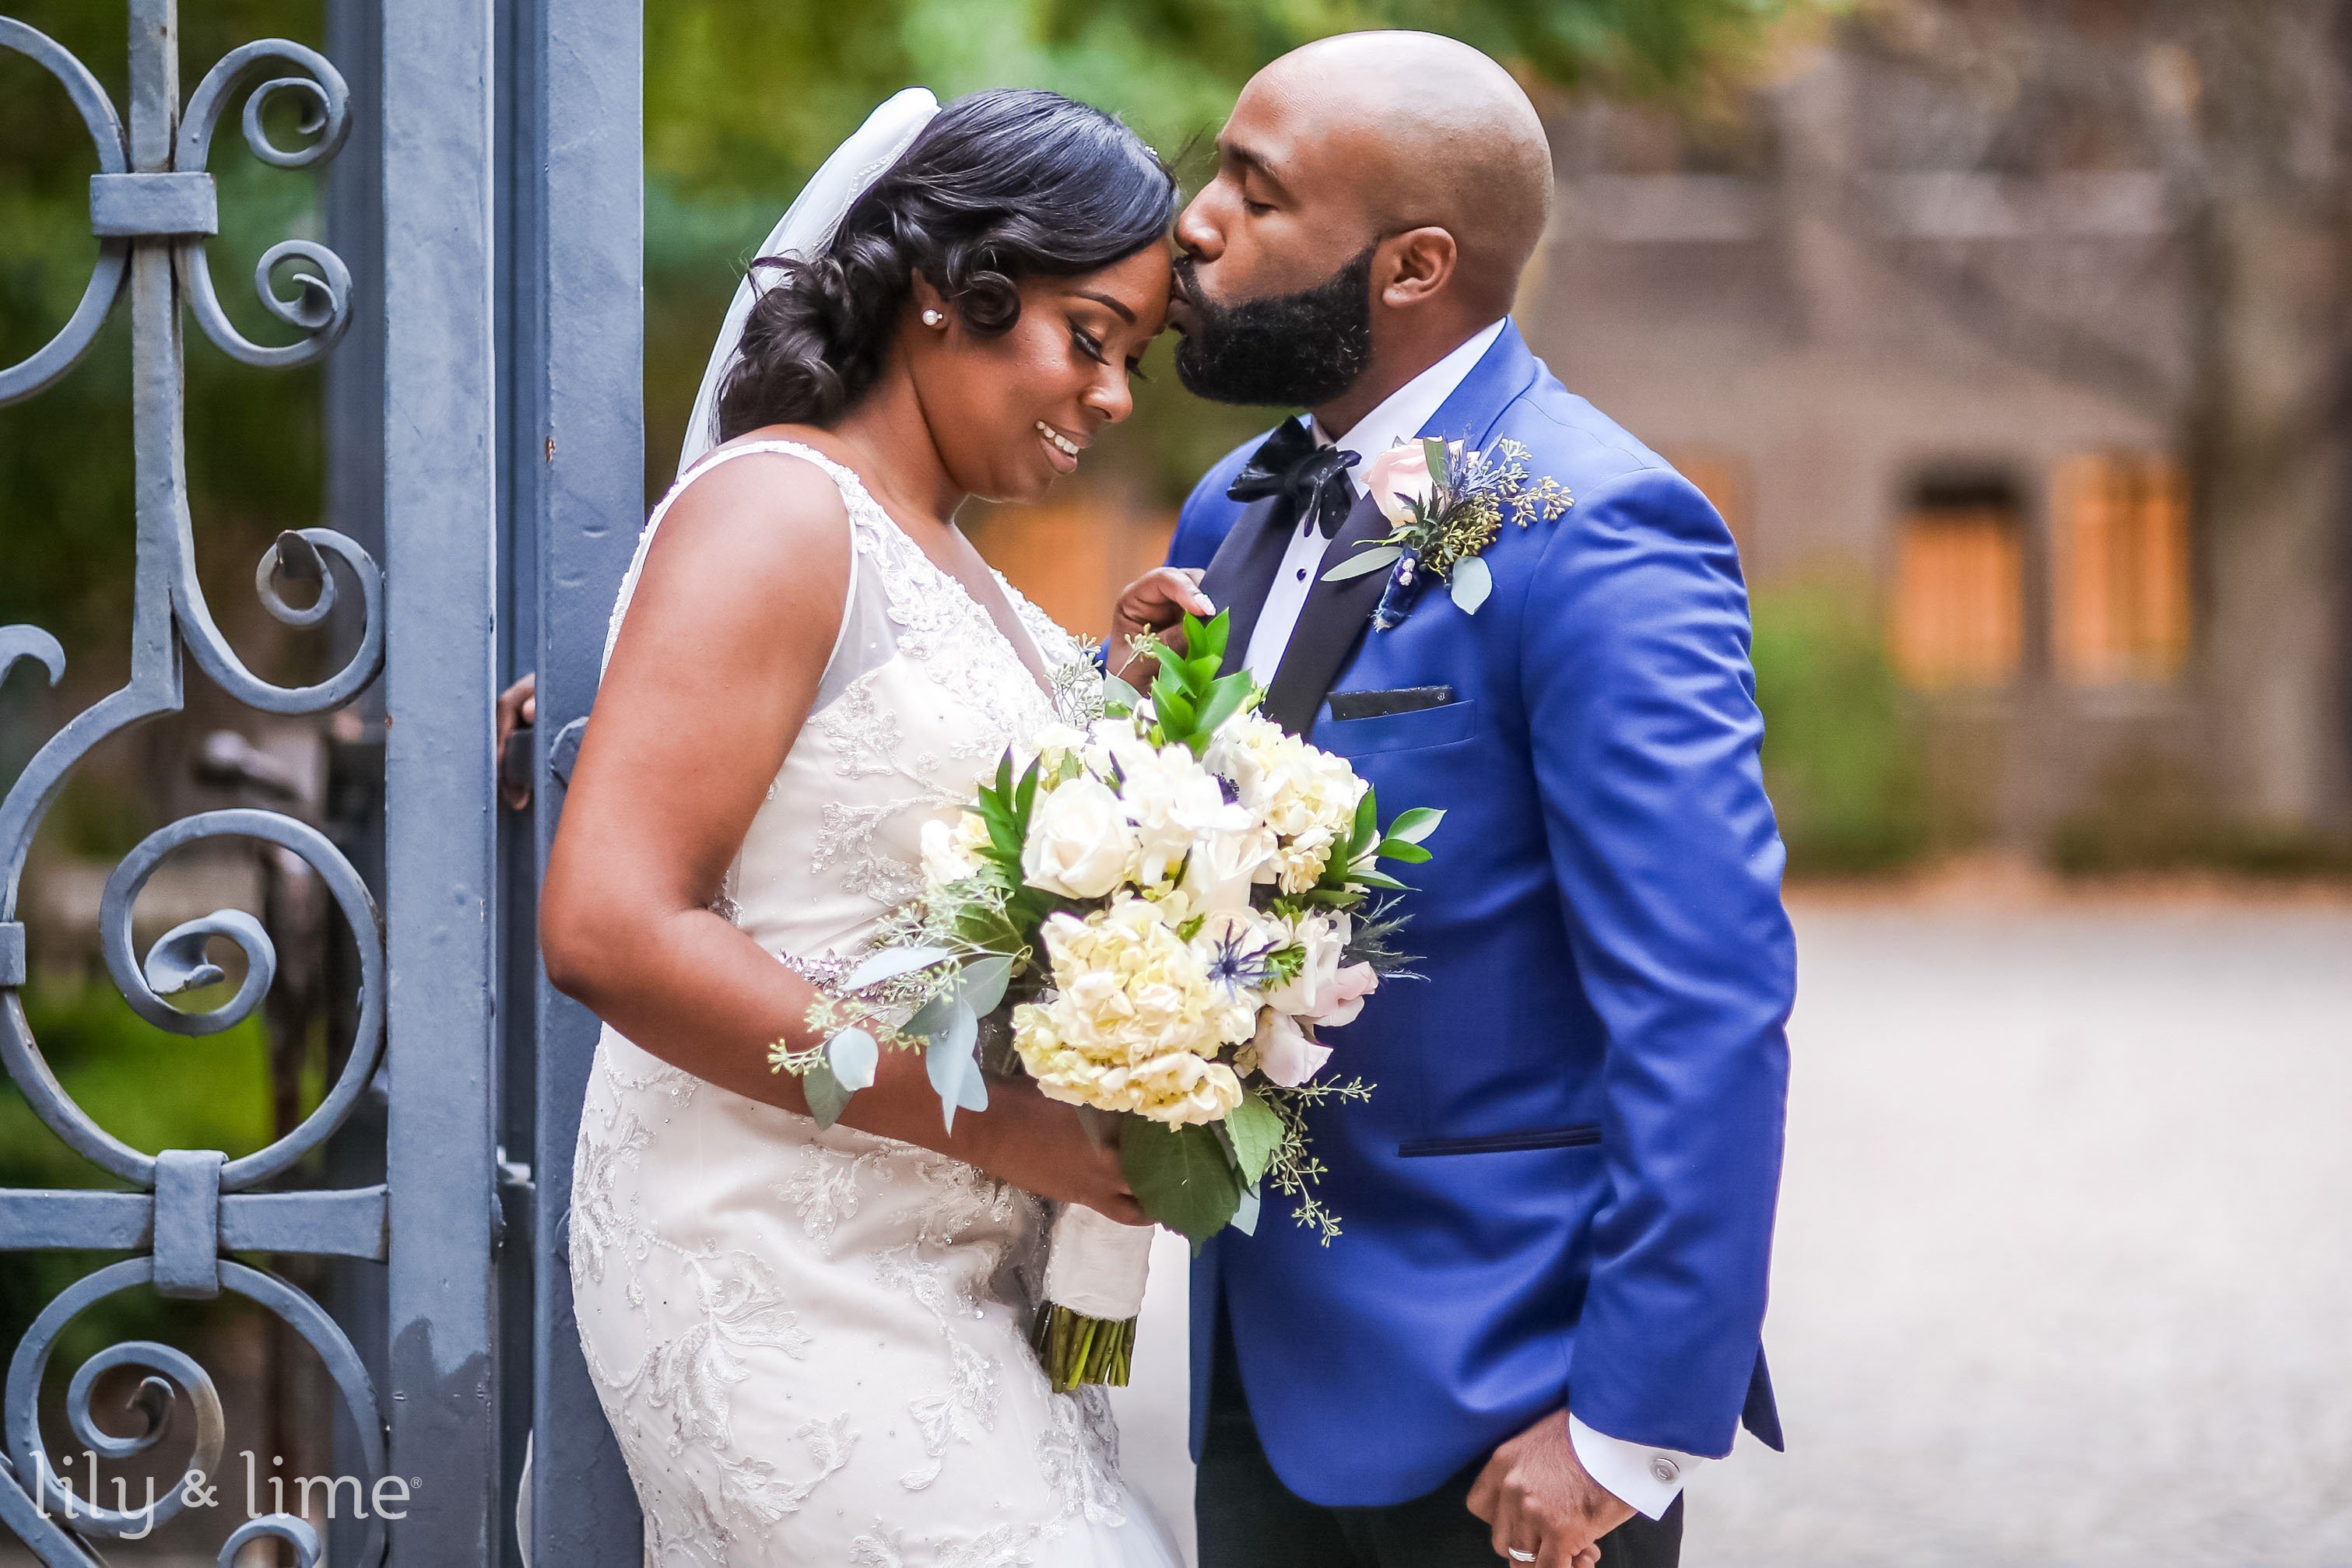 Exploring Black American Wedding Traditions - Get Ordained